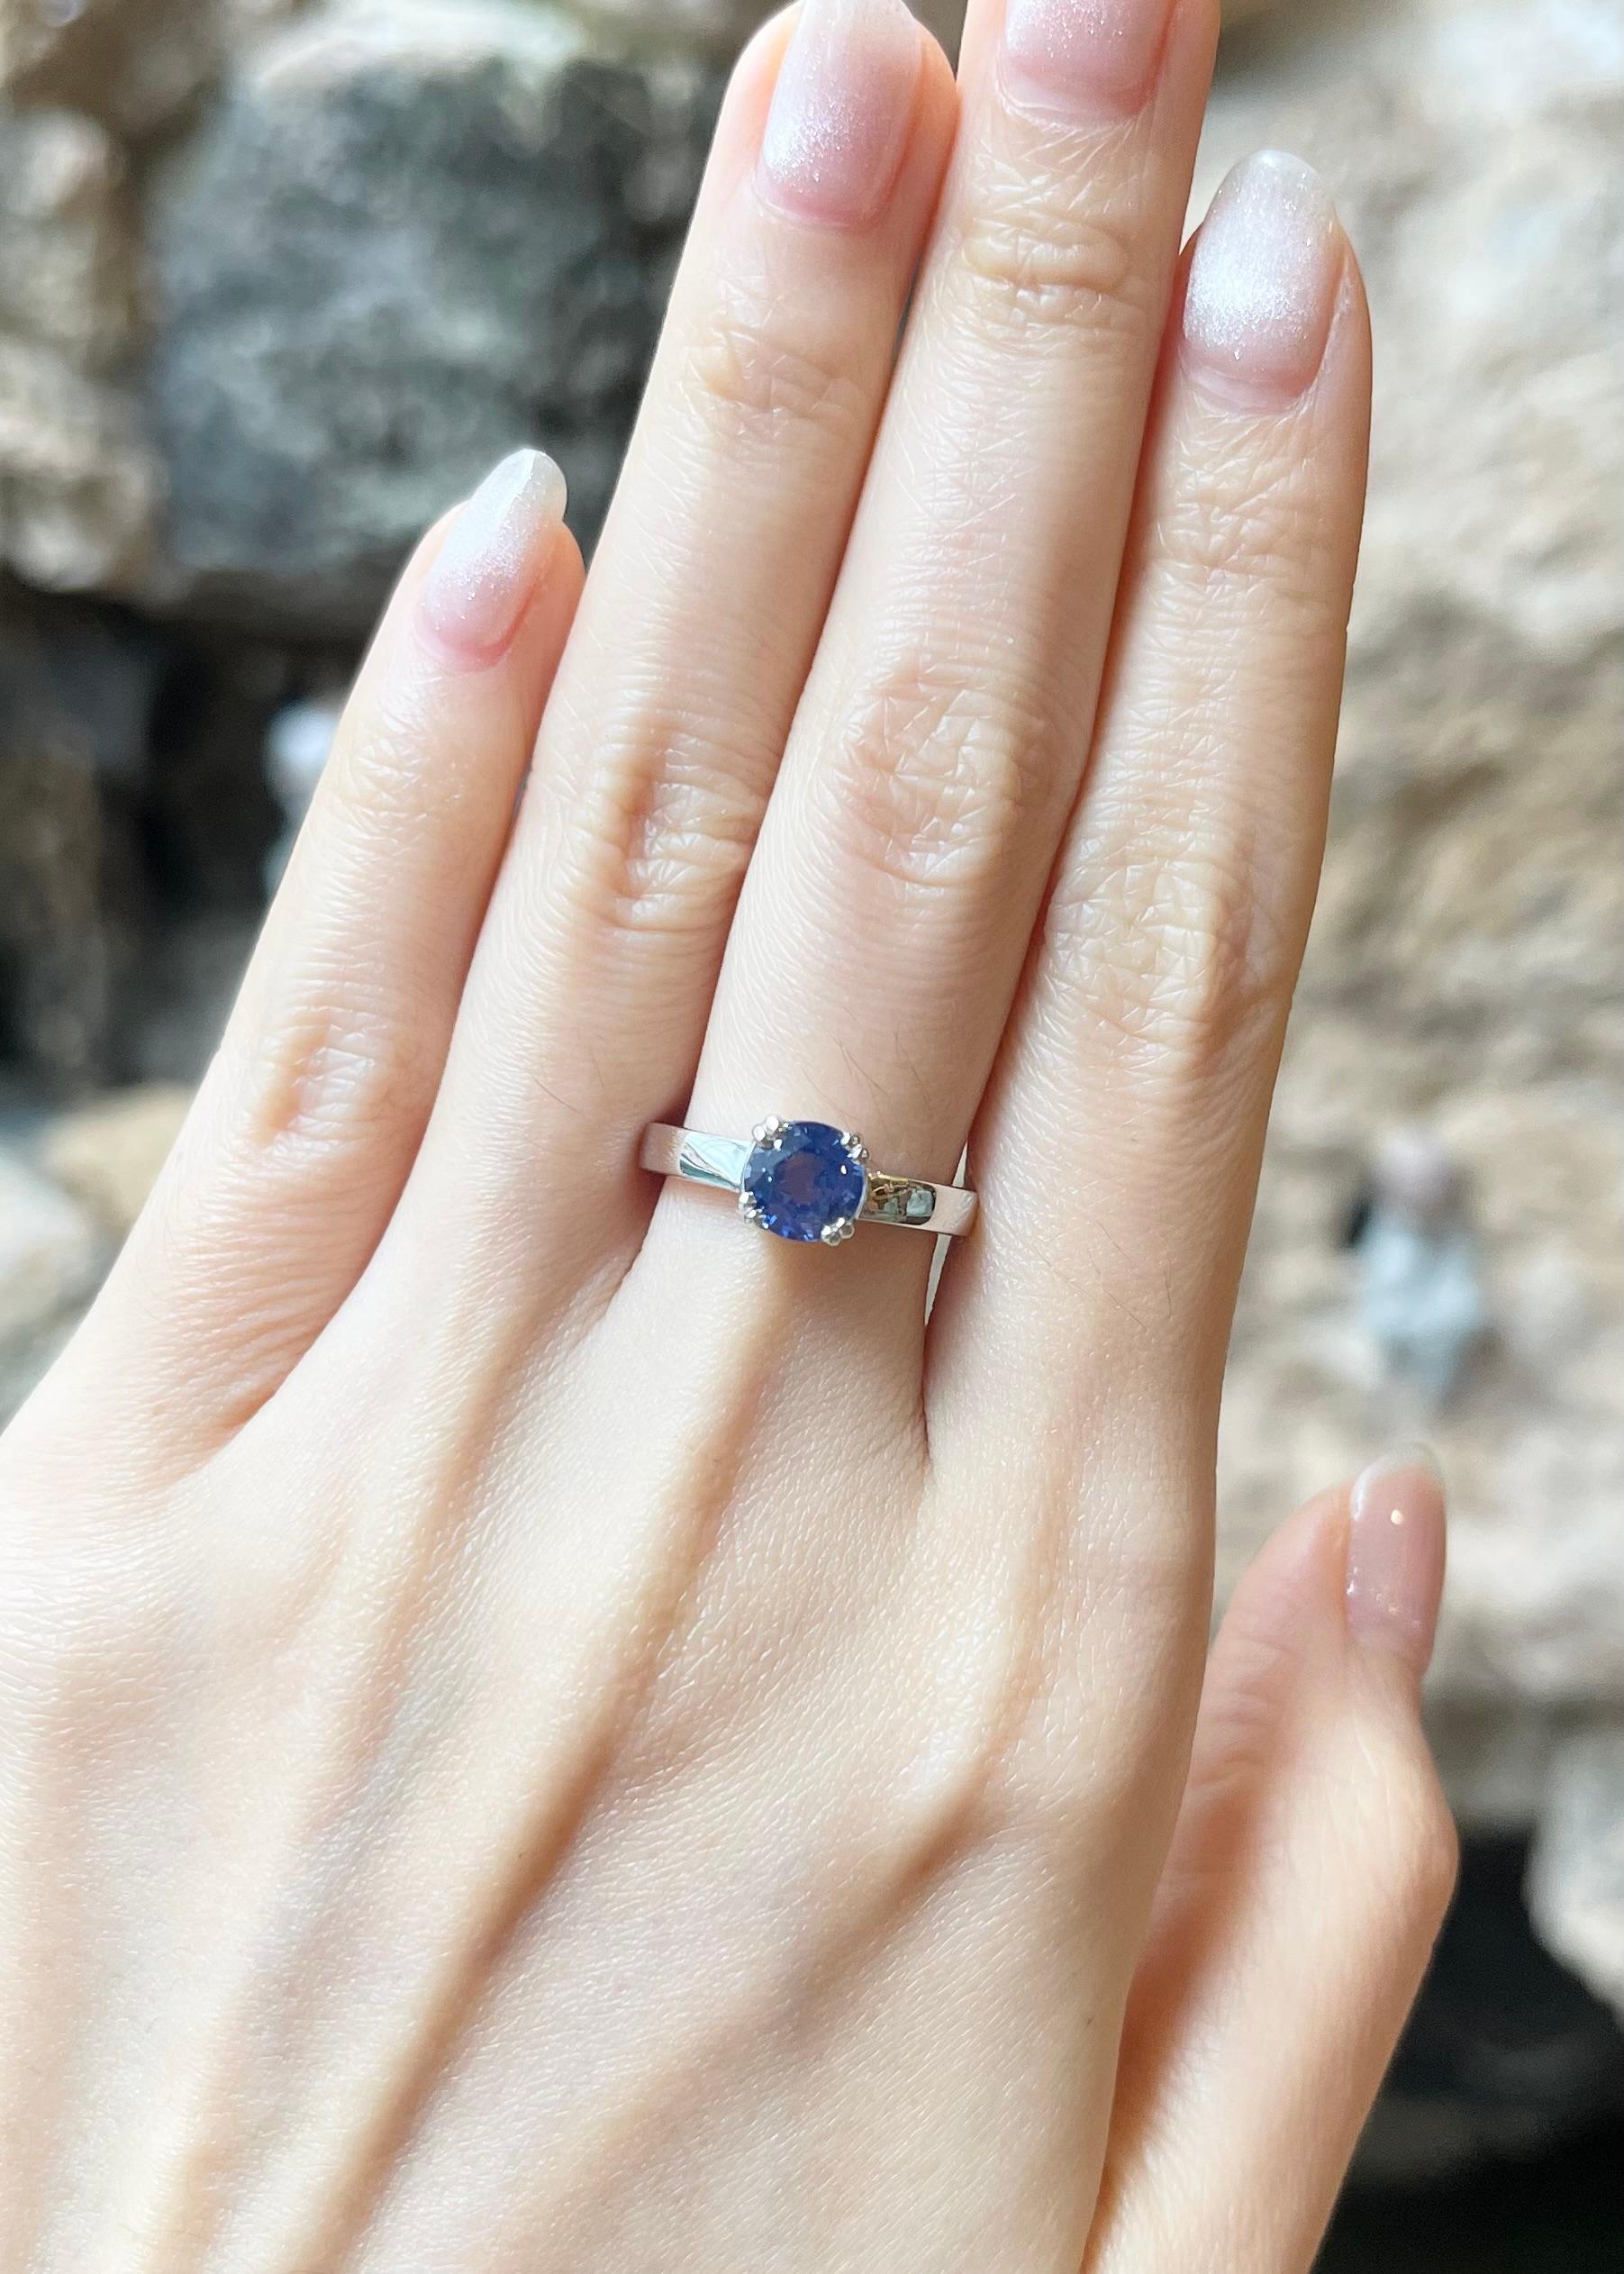 Blue Sapphire 1.41 carat Ring set in 18K White Gold Settings

Width:  0.7 cm 
Length: 0.7 cm
Ring Size: 53
Total Weight: 4.94 grams

